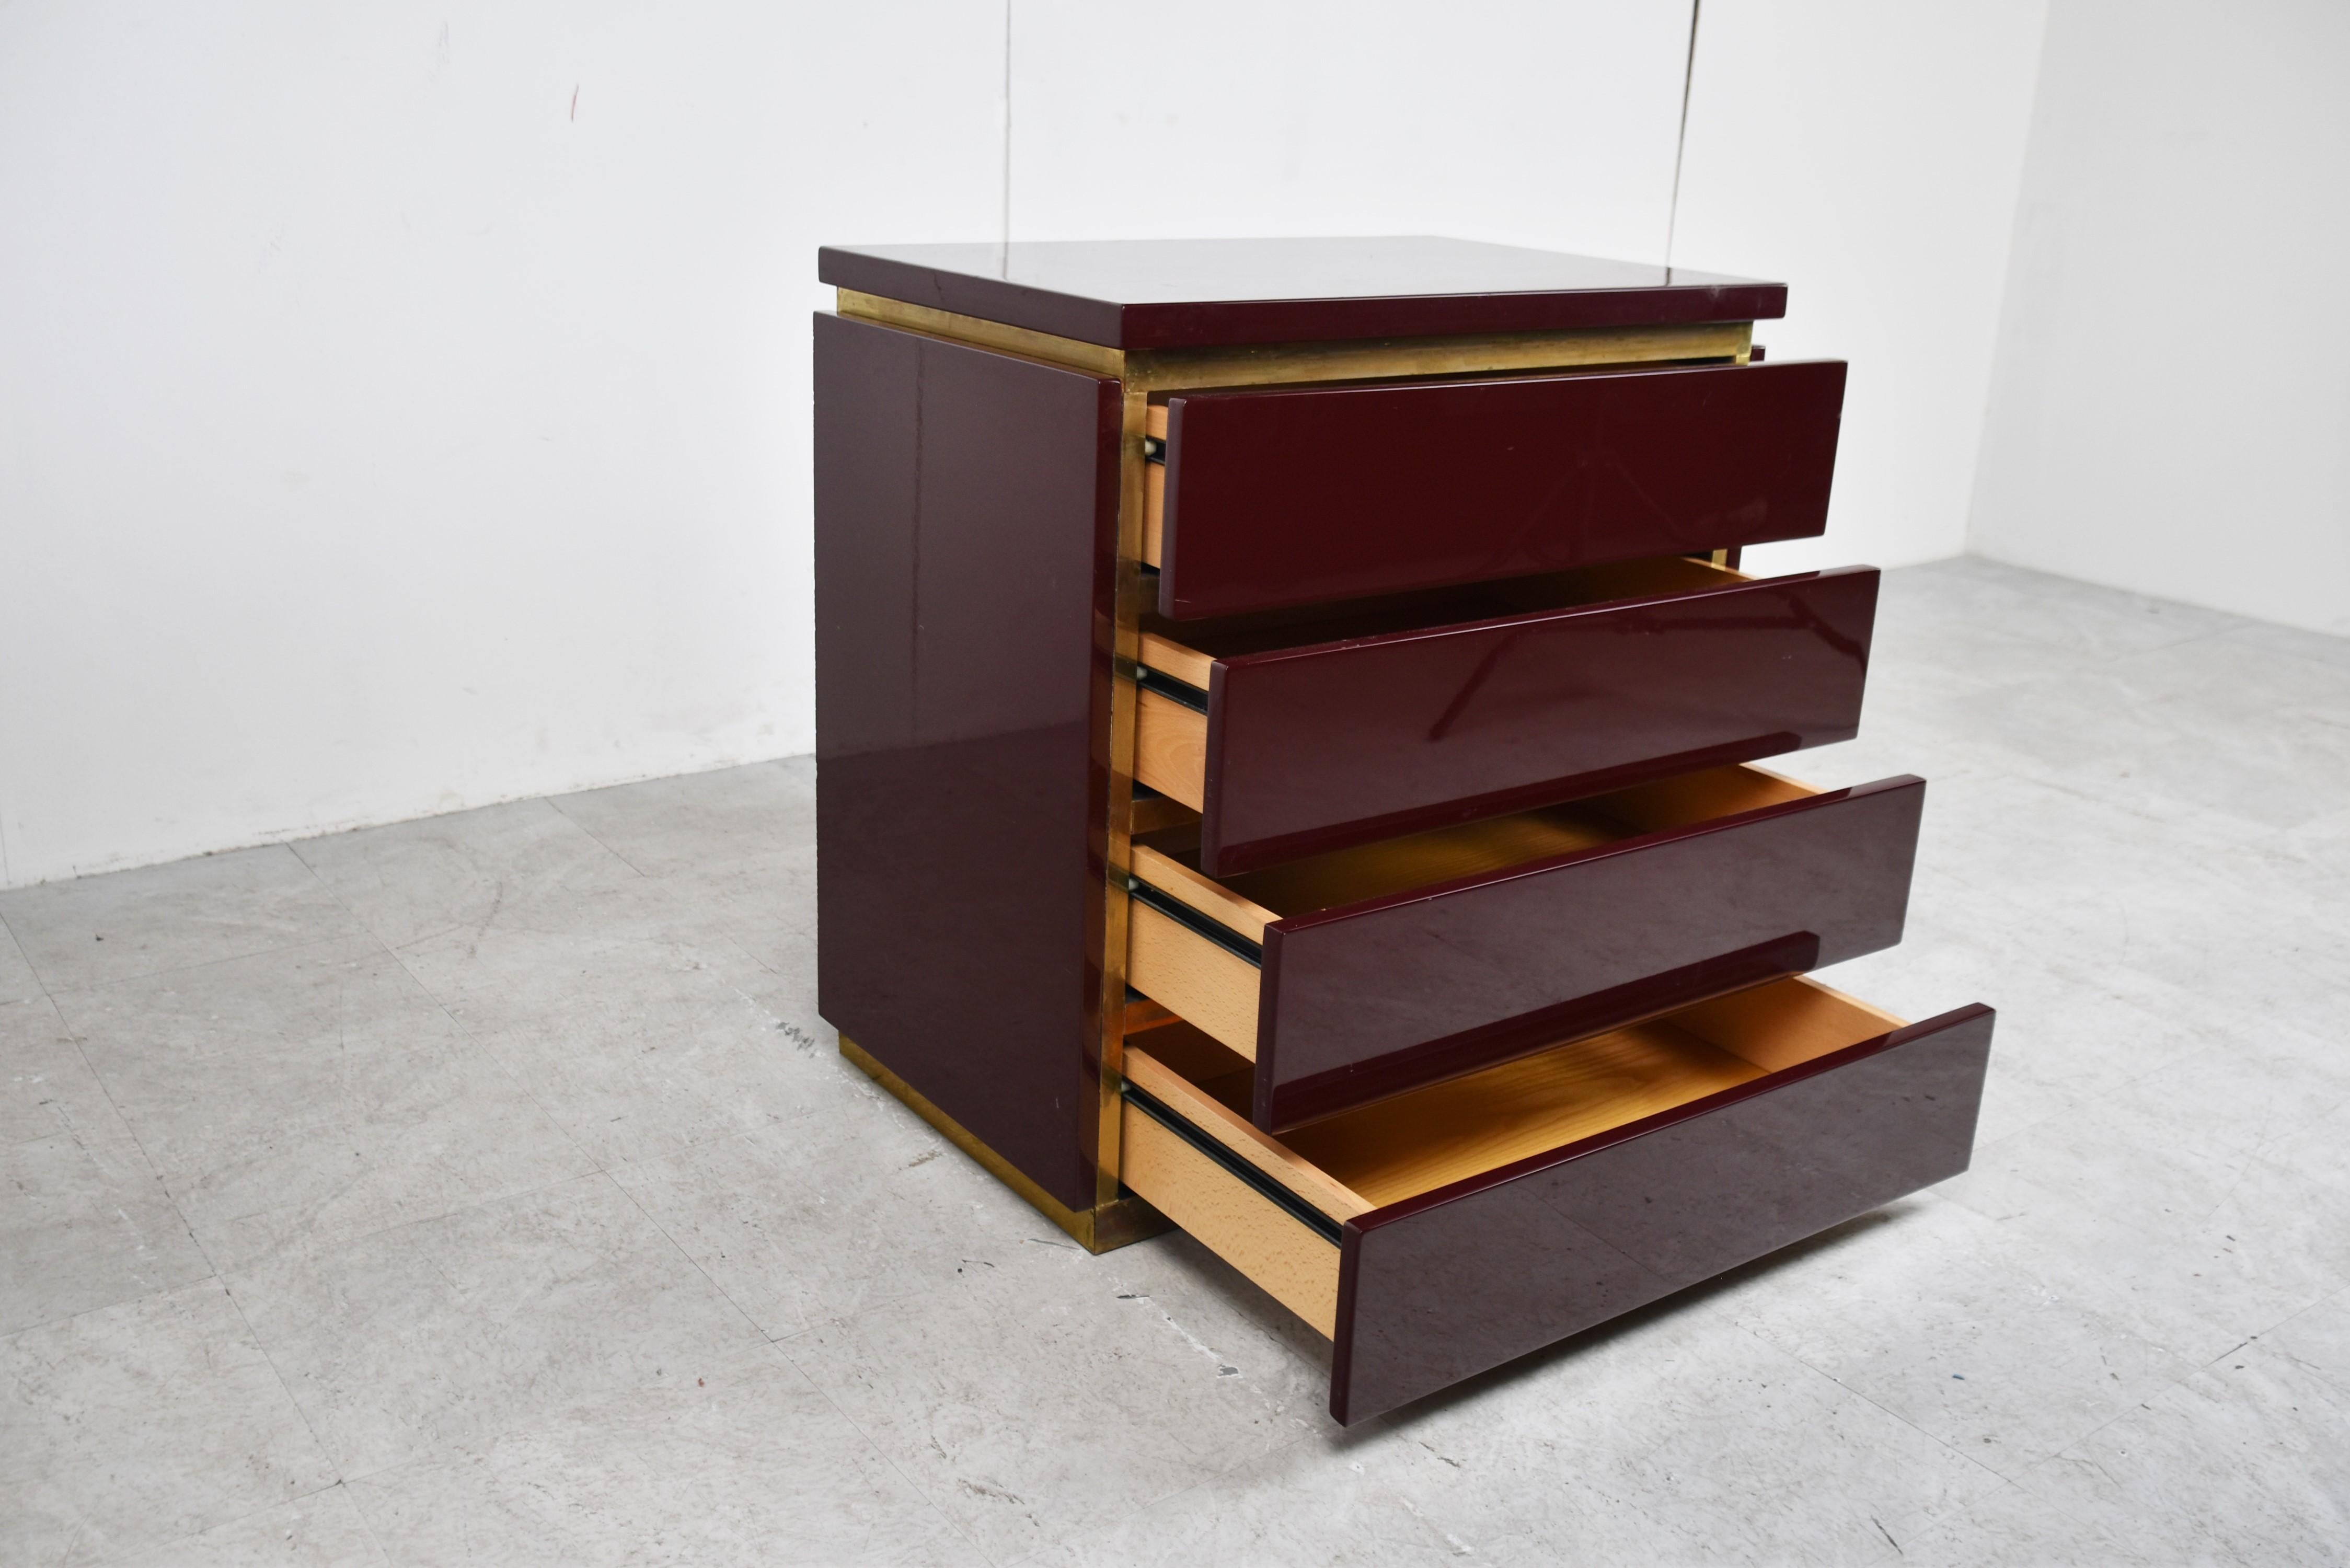 Bordeaux/red lacquered and brass chest of drawers by Jean Claude Mahey.

Jean Claude Mahey always meets the high quality furniture standards and never disappoints.

Seventies/eighties glam

Good overall condition, normal age related